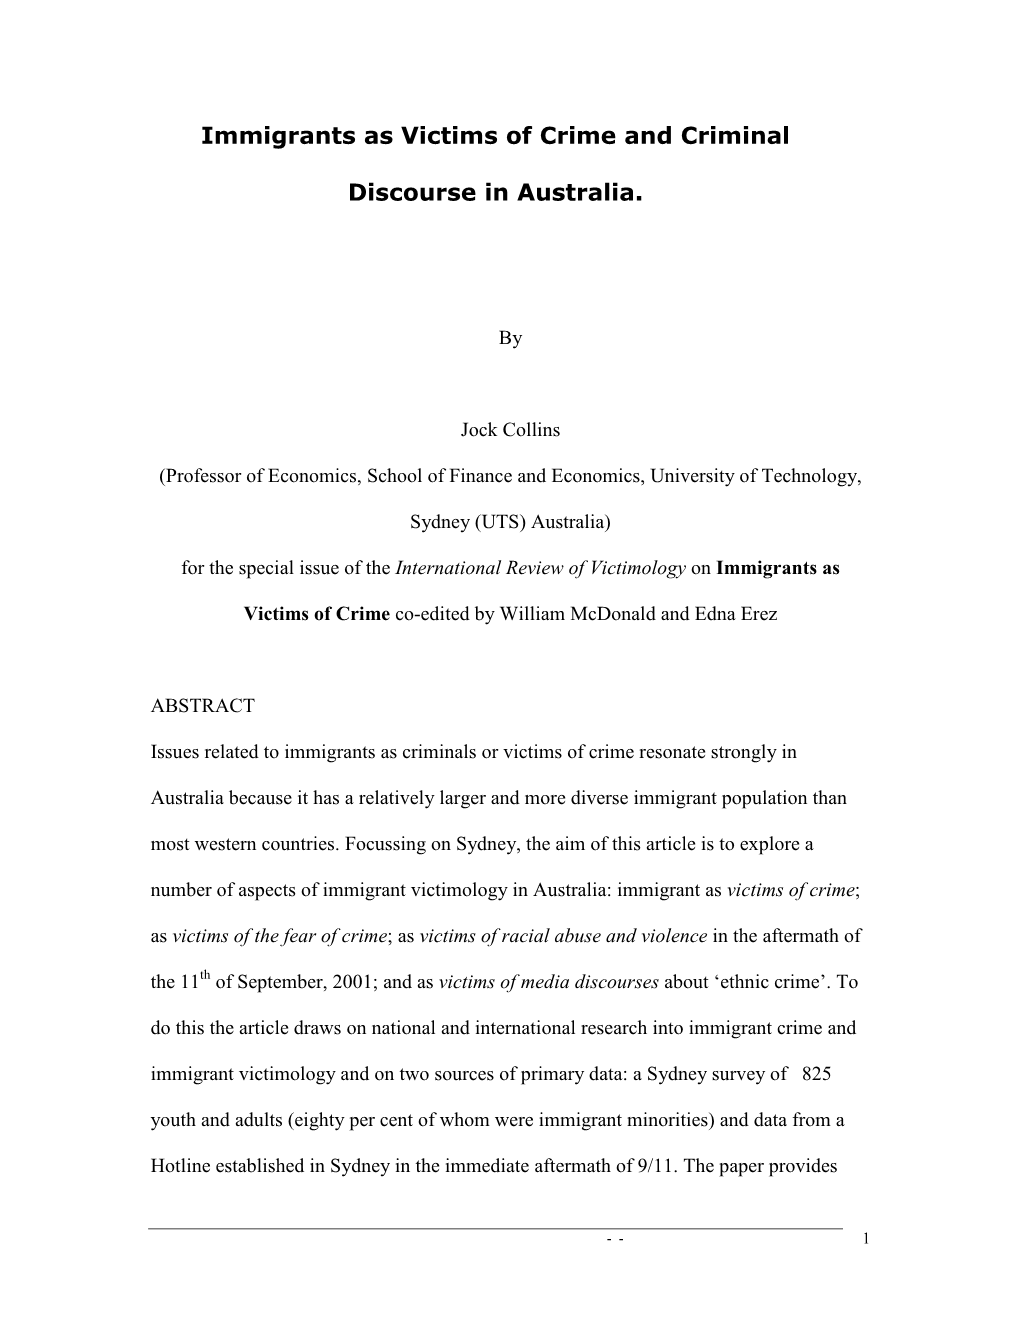 Immigrants As Victims of Crime and Criminal Discourse in Australia